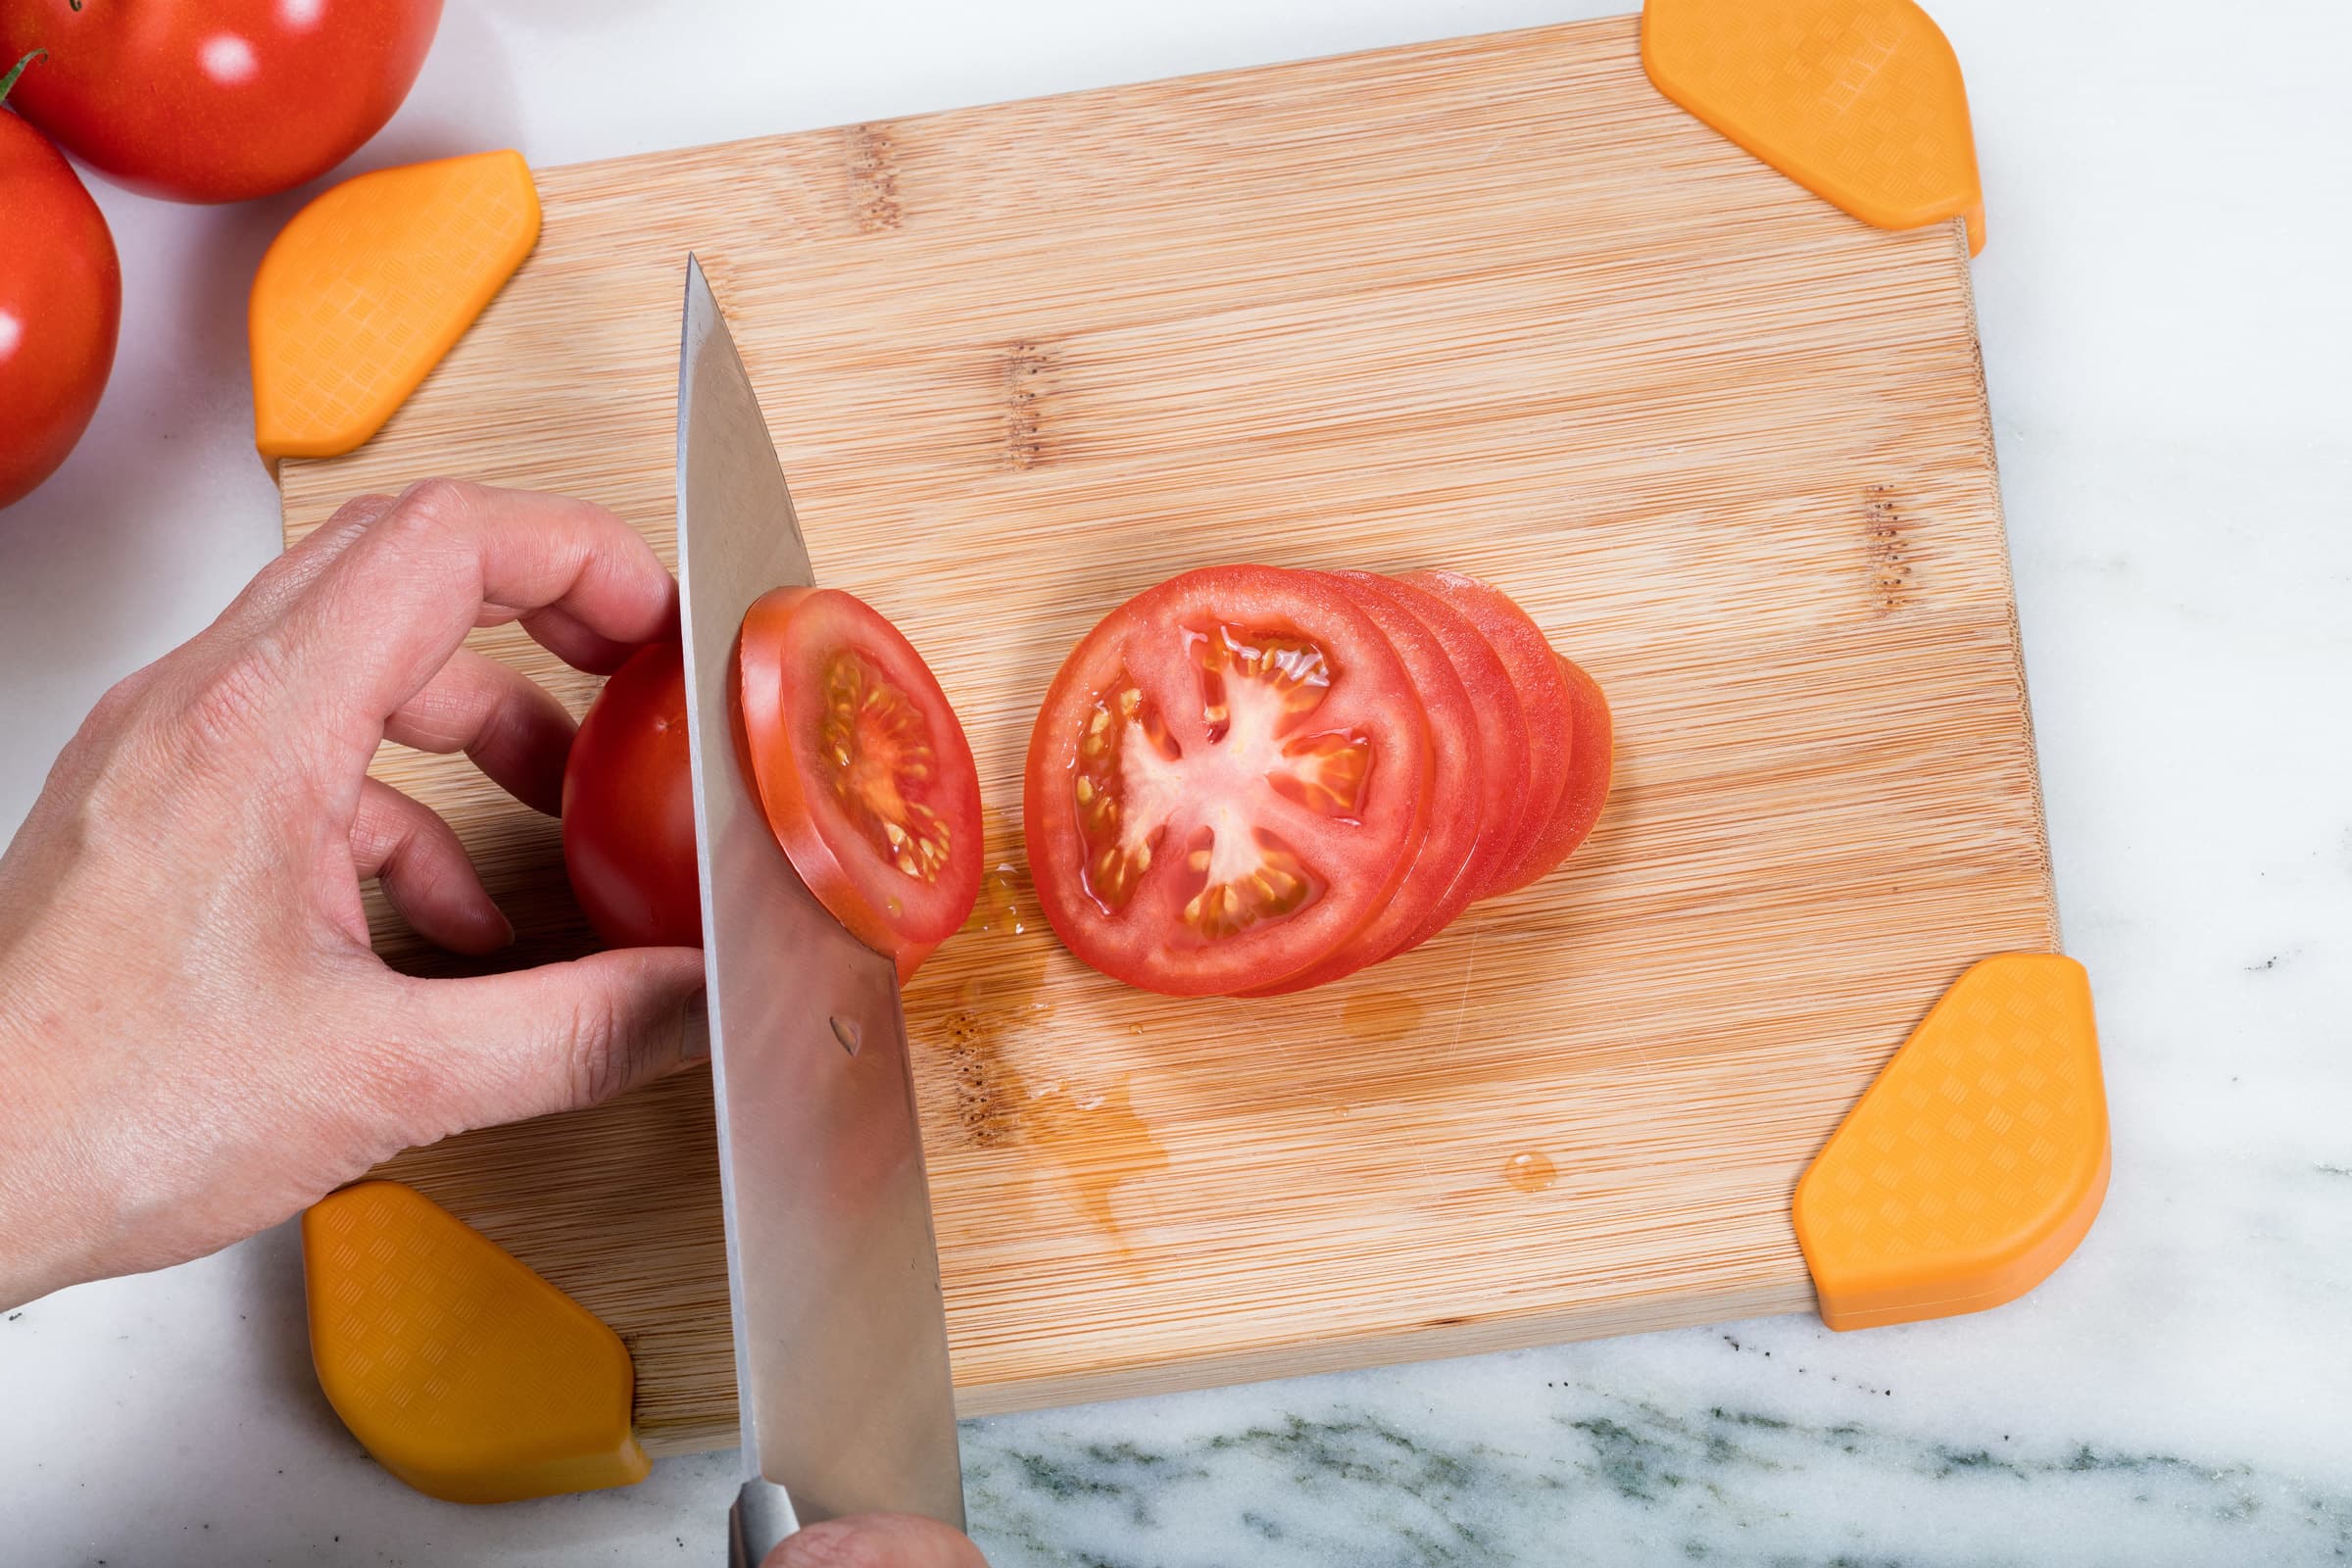 Why It's Essential To Properly Dry Your Bamboo Cutting Board